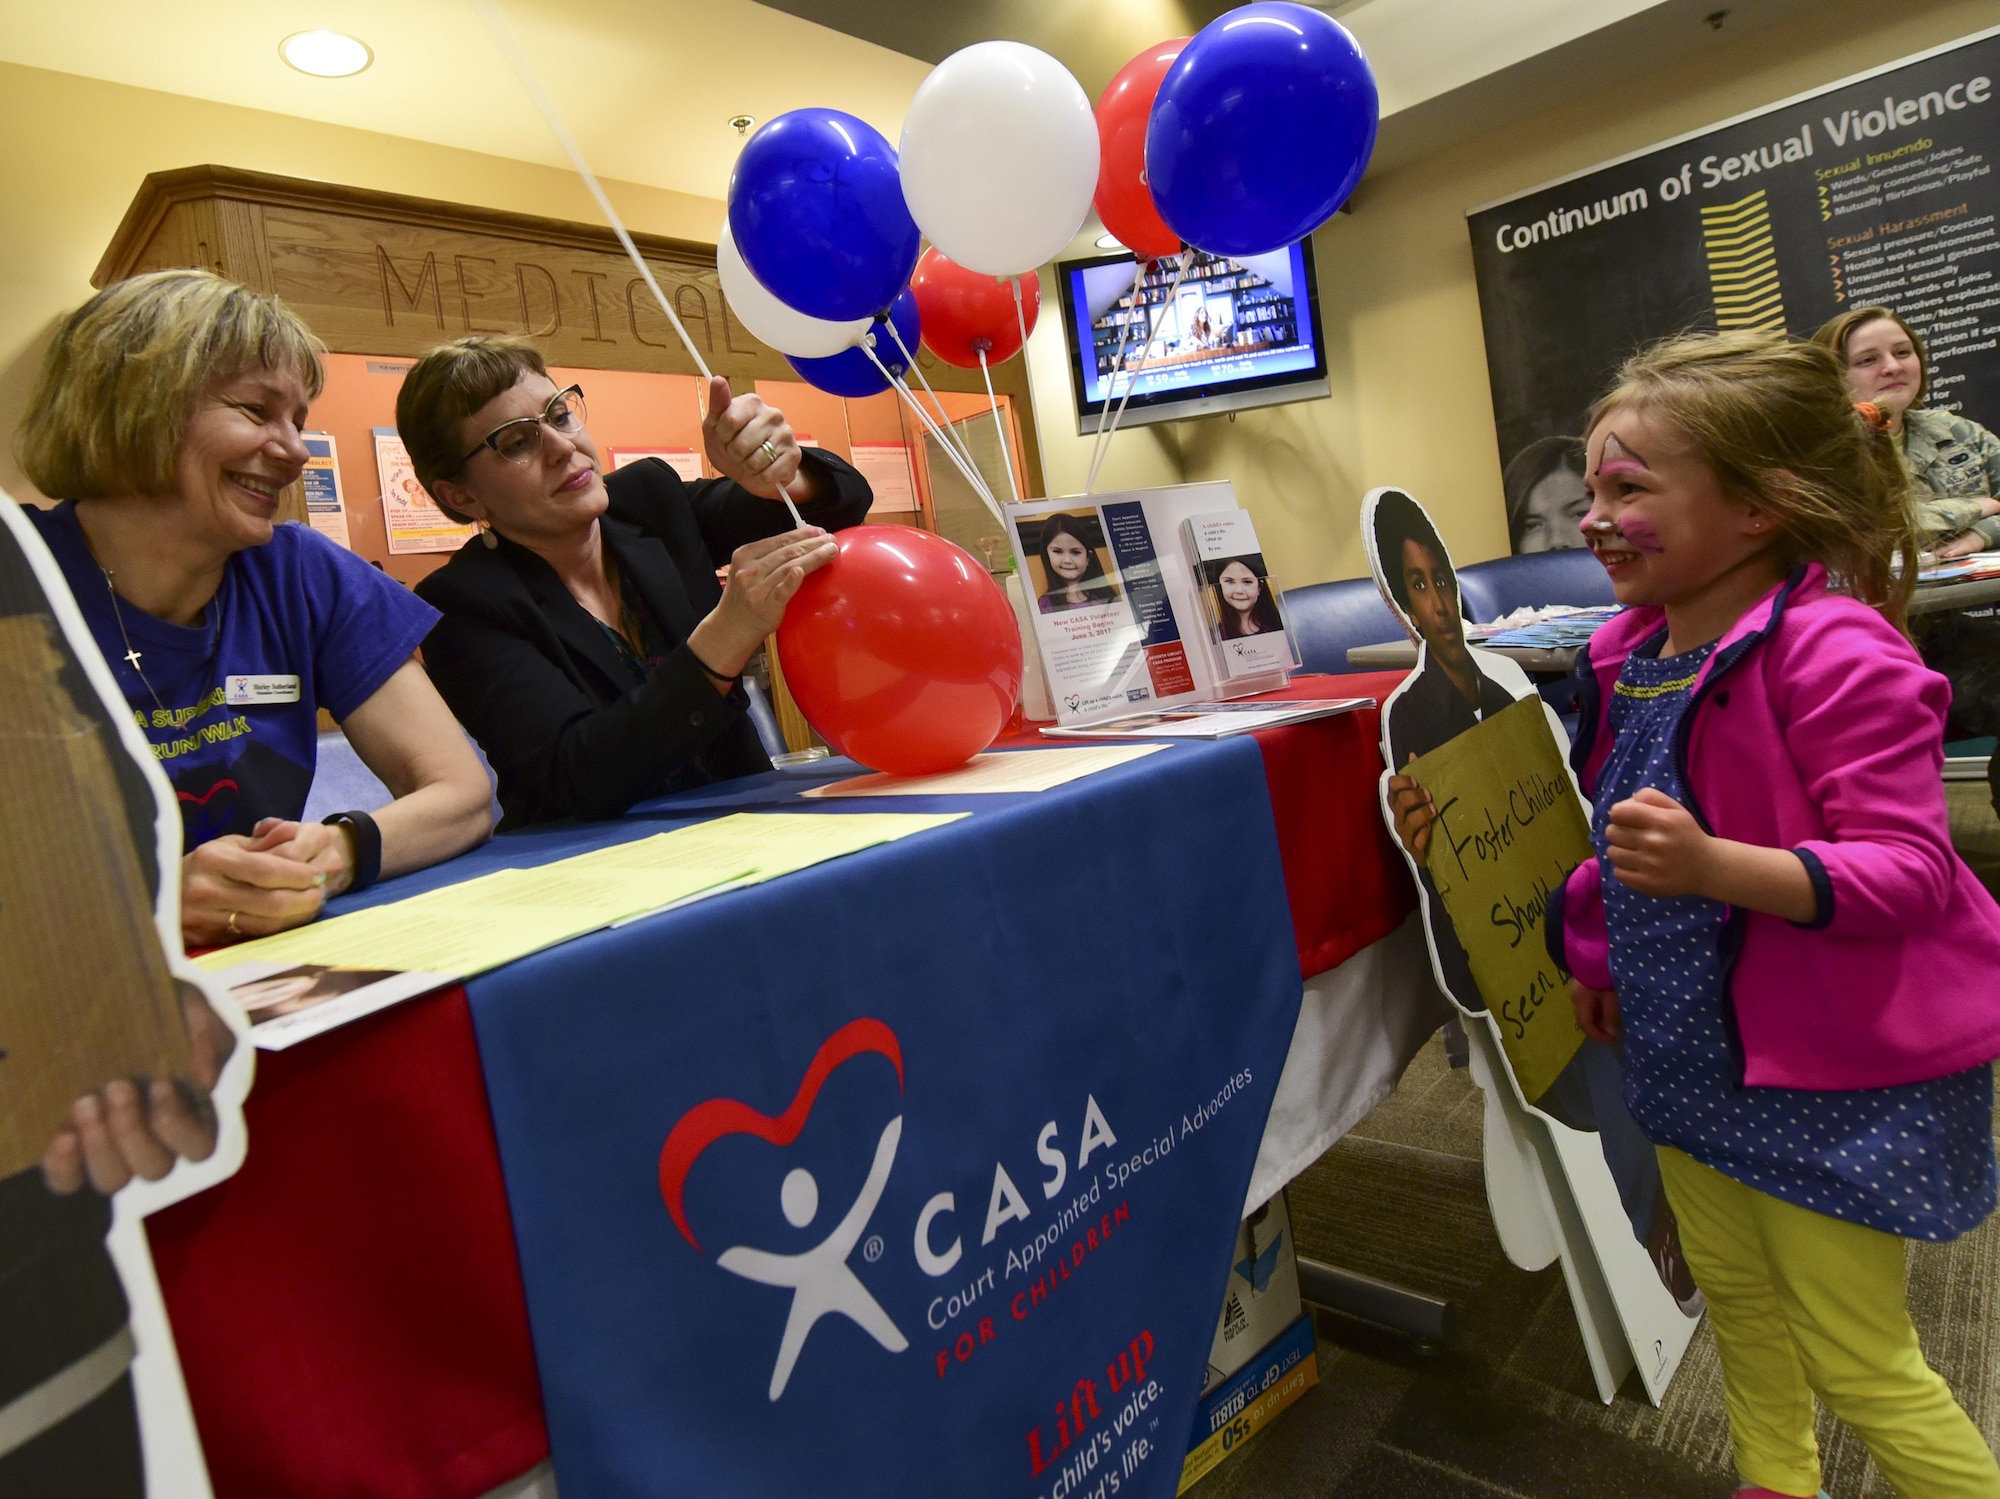 Aniah Perry waits for a balloon during the 2017 Children’s Fair inside the 28th Medical Group at Ellsworth Air Force Base, S.D., April 20, 2017. Volunteer and non-profit organizations such as Youth and Family Services, Court Appointed Special Advocates, Family Advocacy and the Children’s Home Society participated in the event, providing parents with resources and information on child abuse prevention. (U.S. Air Force photo by Airman 1st Class Randahl J. Jenson)  